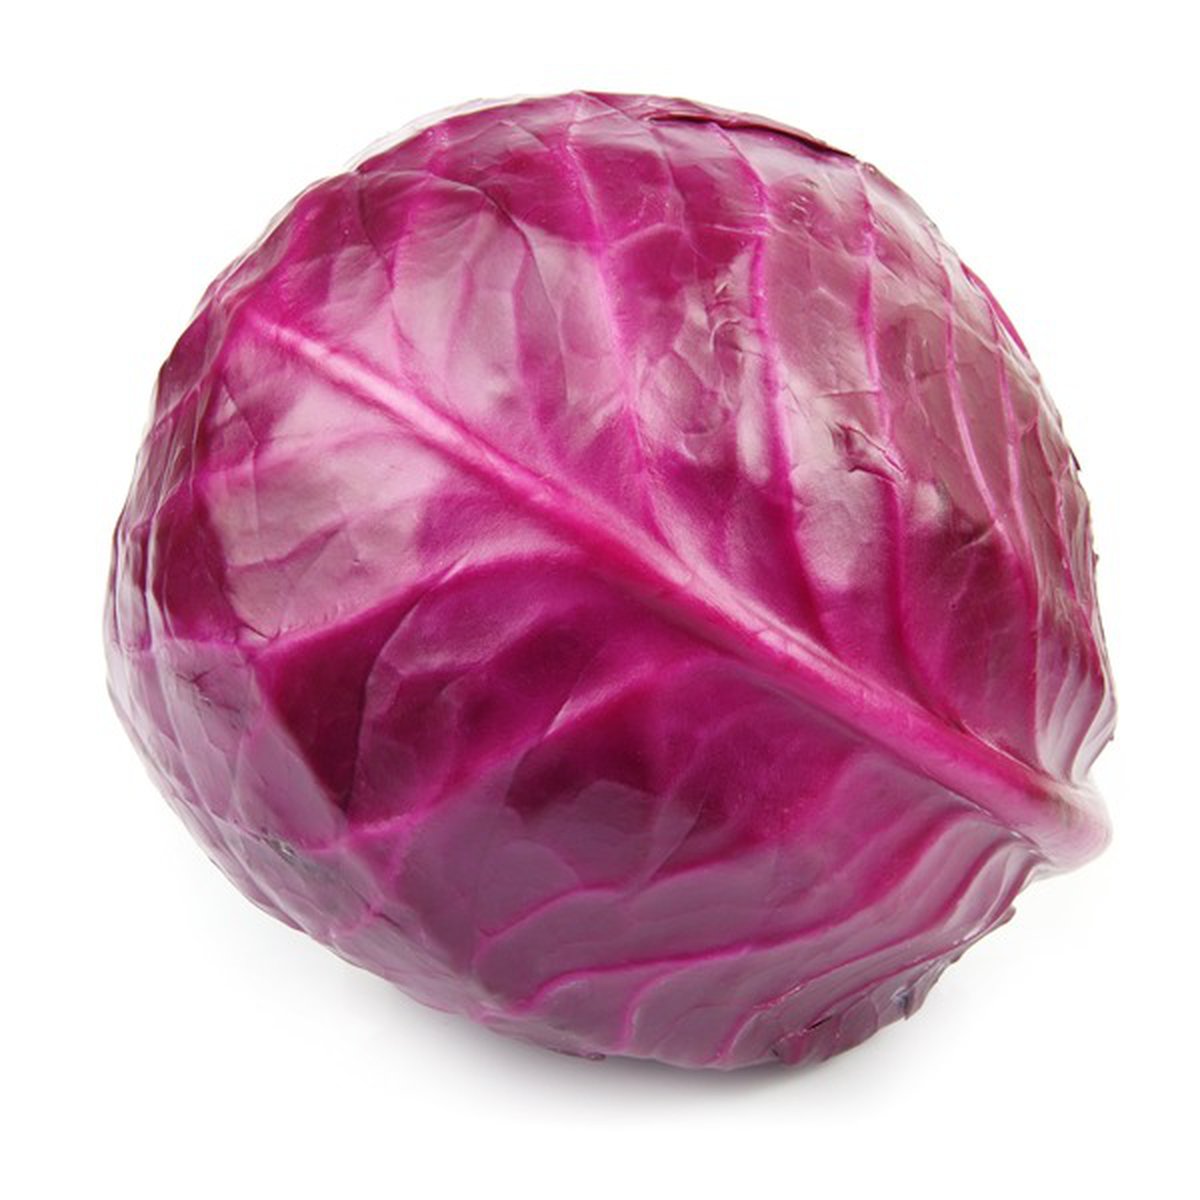 thin sliced cabbage